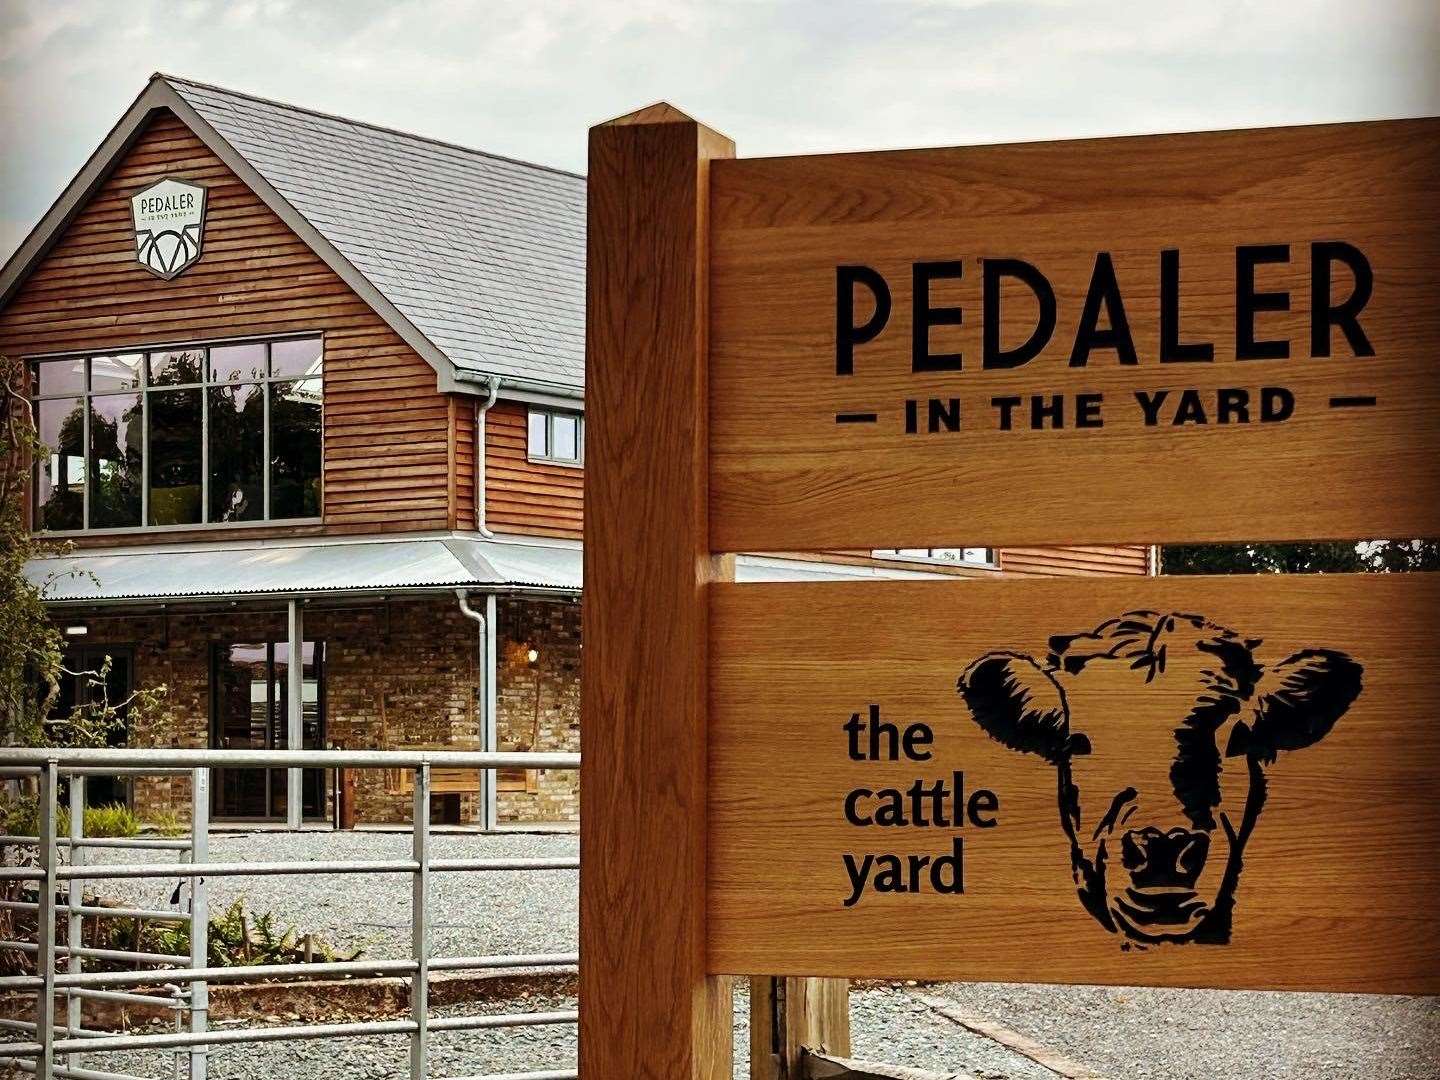 The Pedaler in the Yard cafe in Manston. Picture: Aaron Hudson-Tyreman